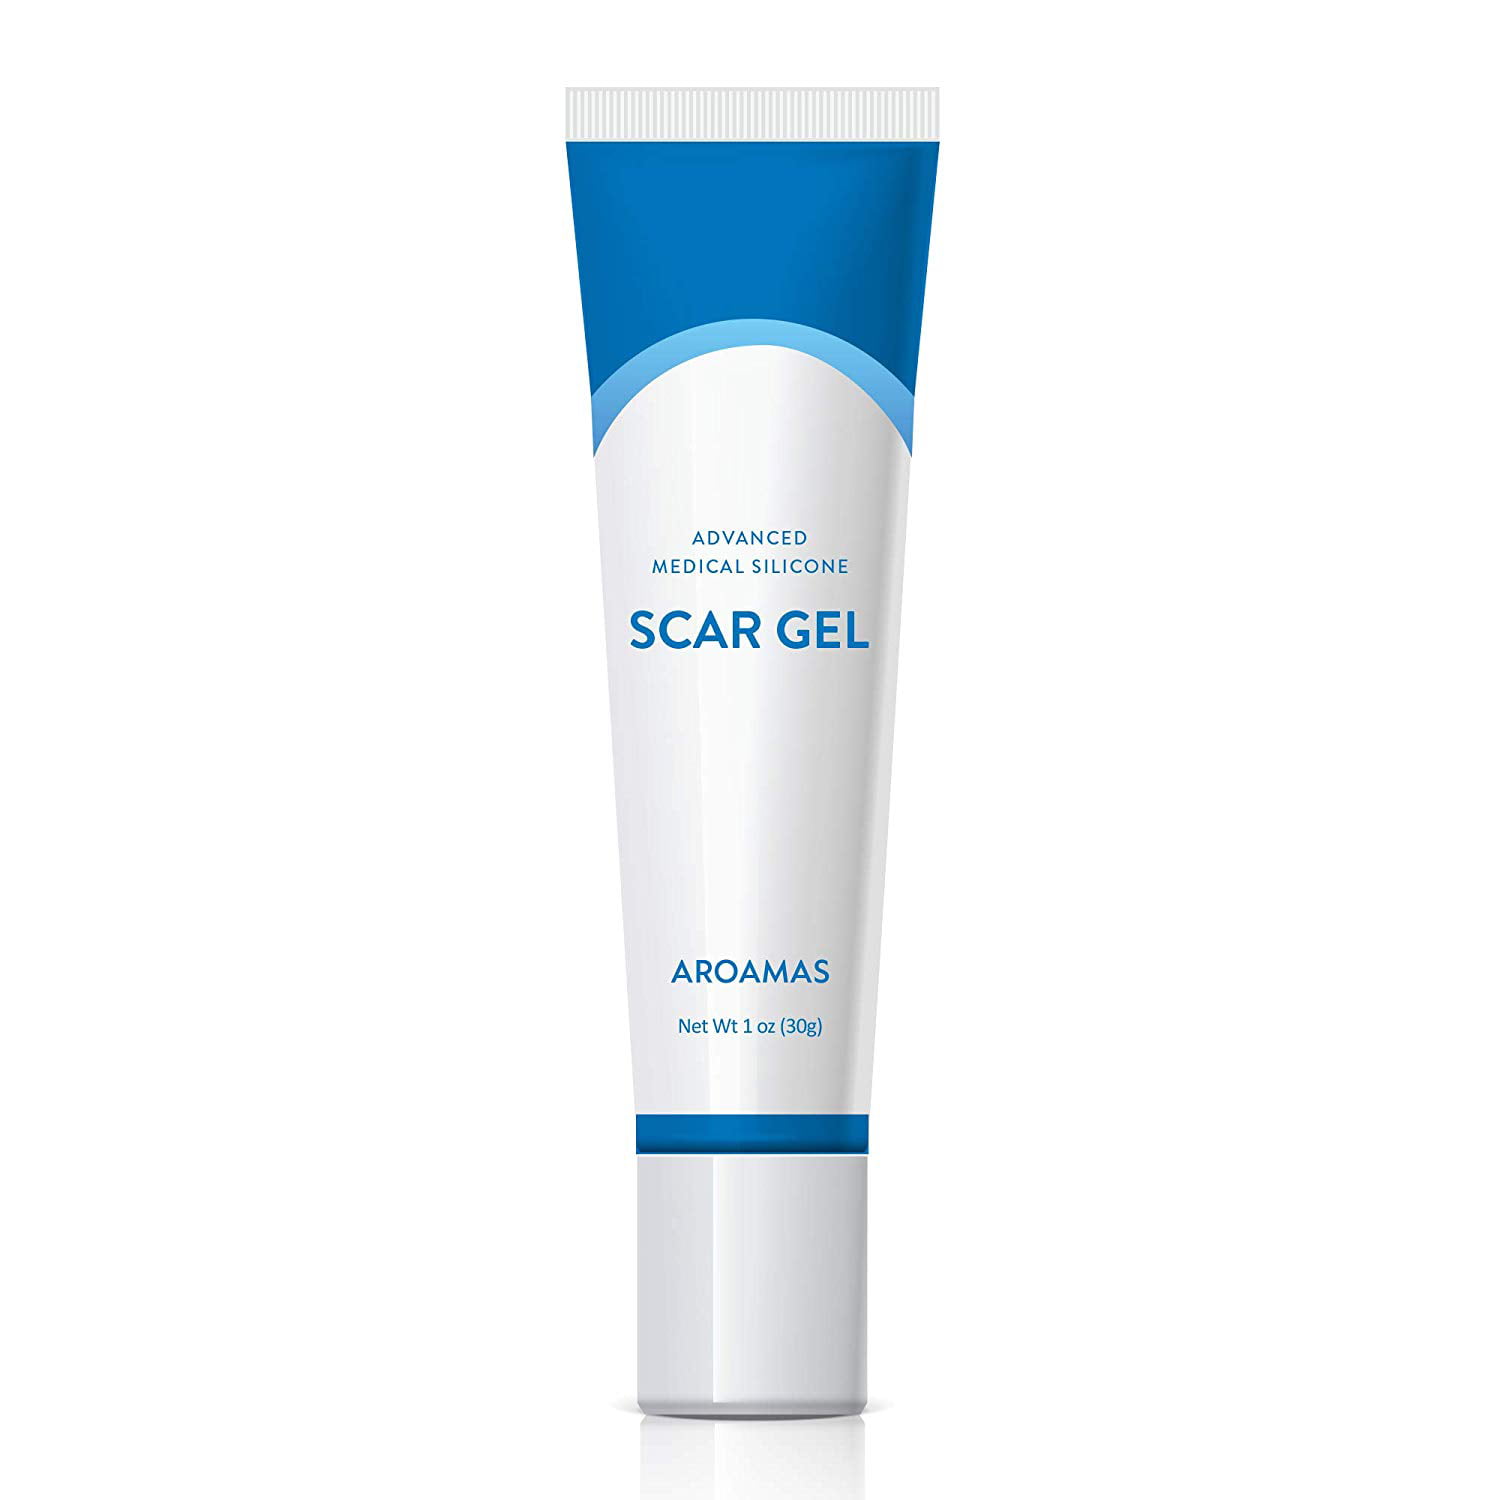 Advanced Scar Gel Medical-Grade Silicone for Body, Stretch Marks, C-Sections, Surgical, Burn, Old & New Scars, Clinically Proven, 30 g - Walmart.com